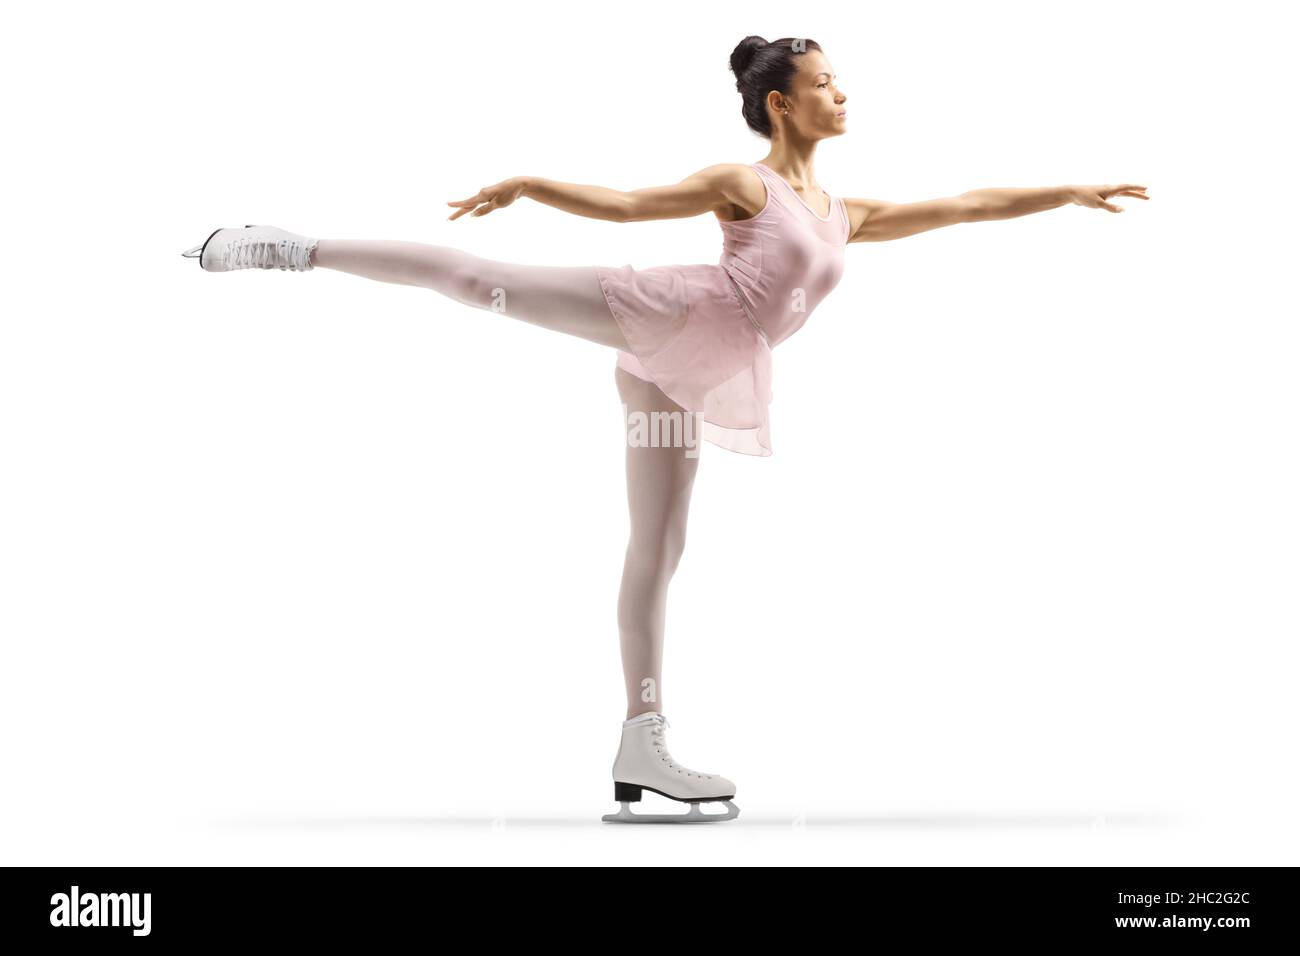 Full length shot of a young woman in a pink dress ice skating with one leg up isolated on white background Stock Photo